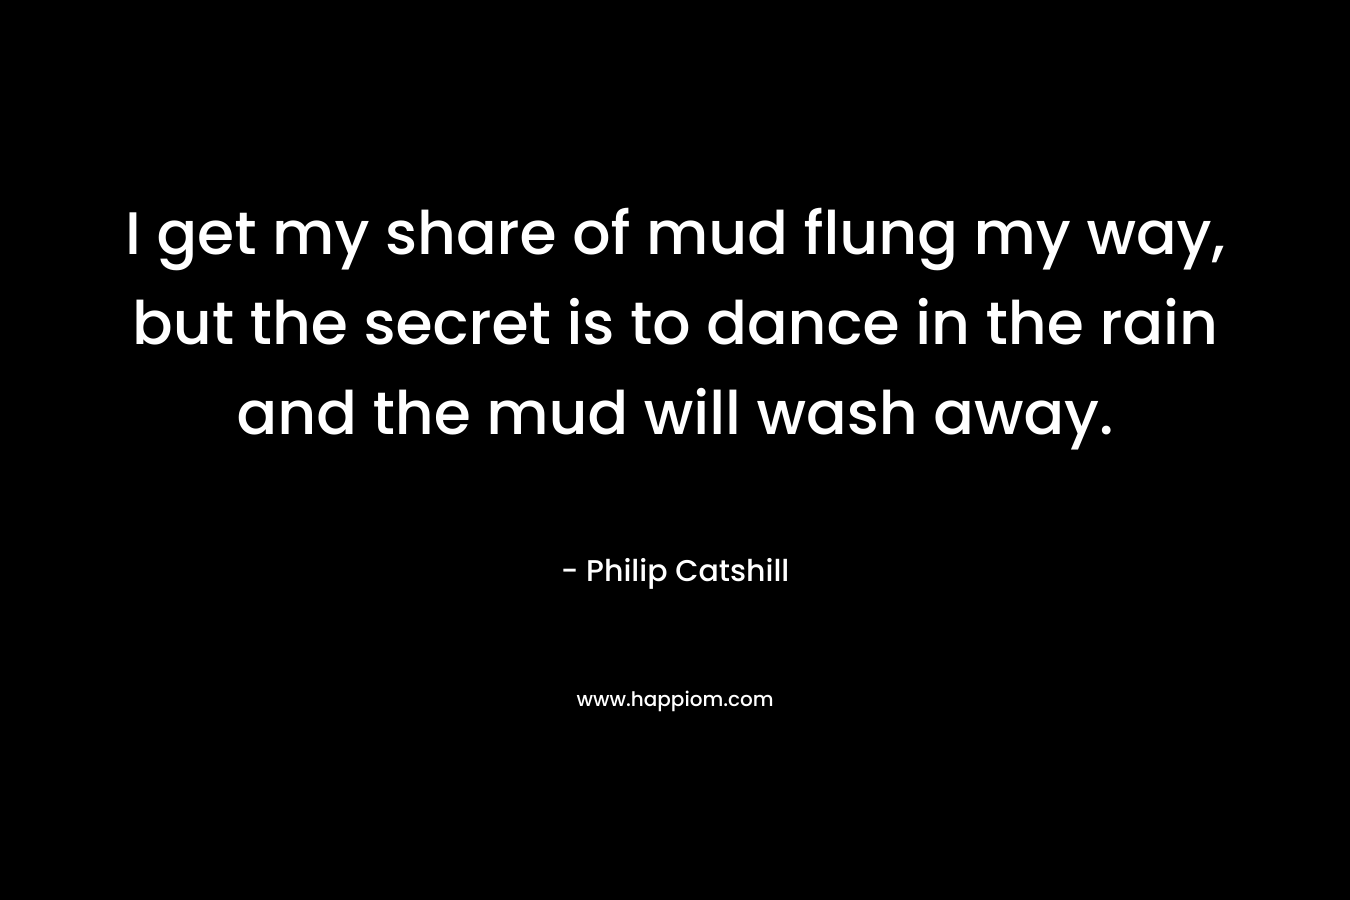 I get my share of mud flung my way, but the secret is to dance in the rain and the mud will wash away.